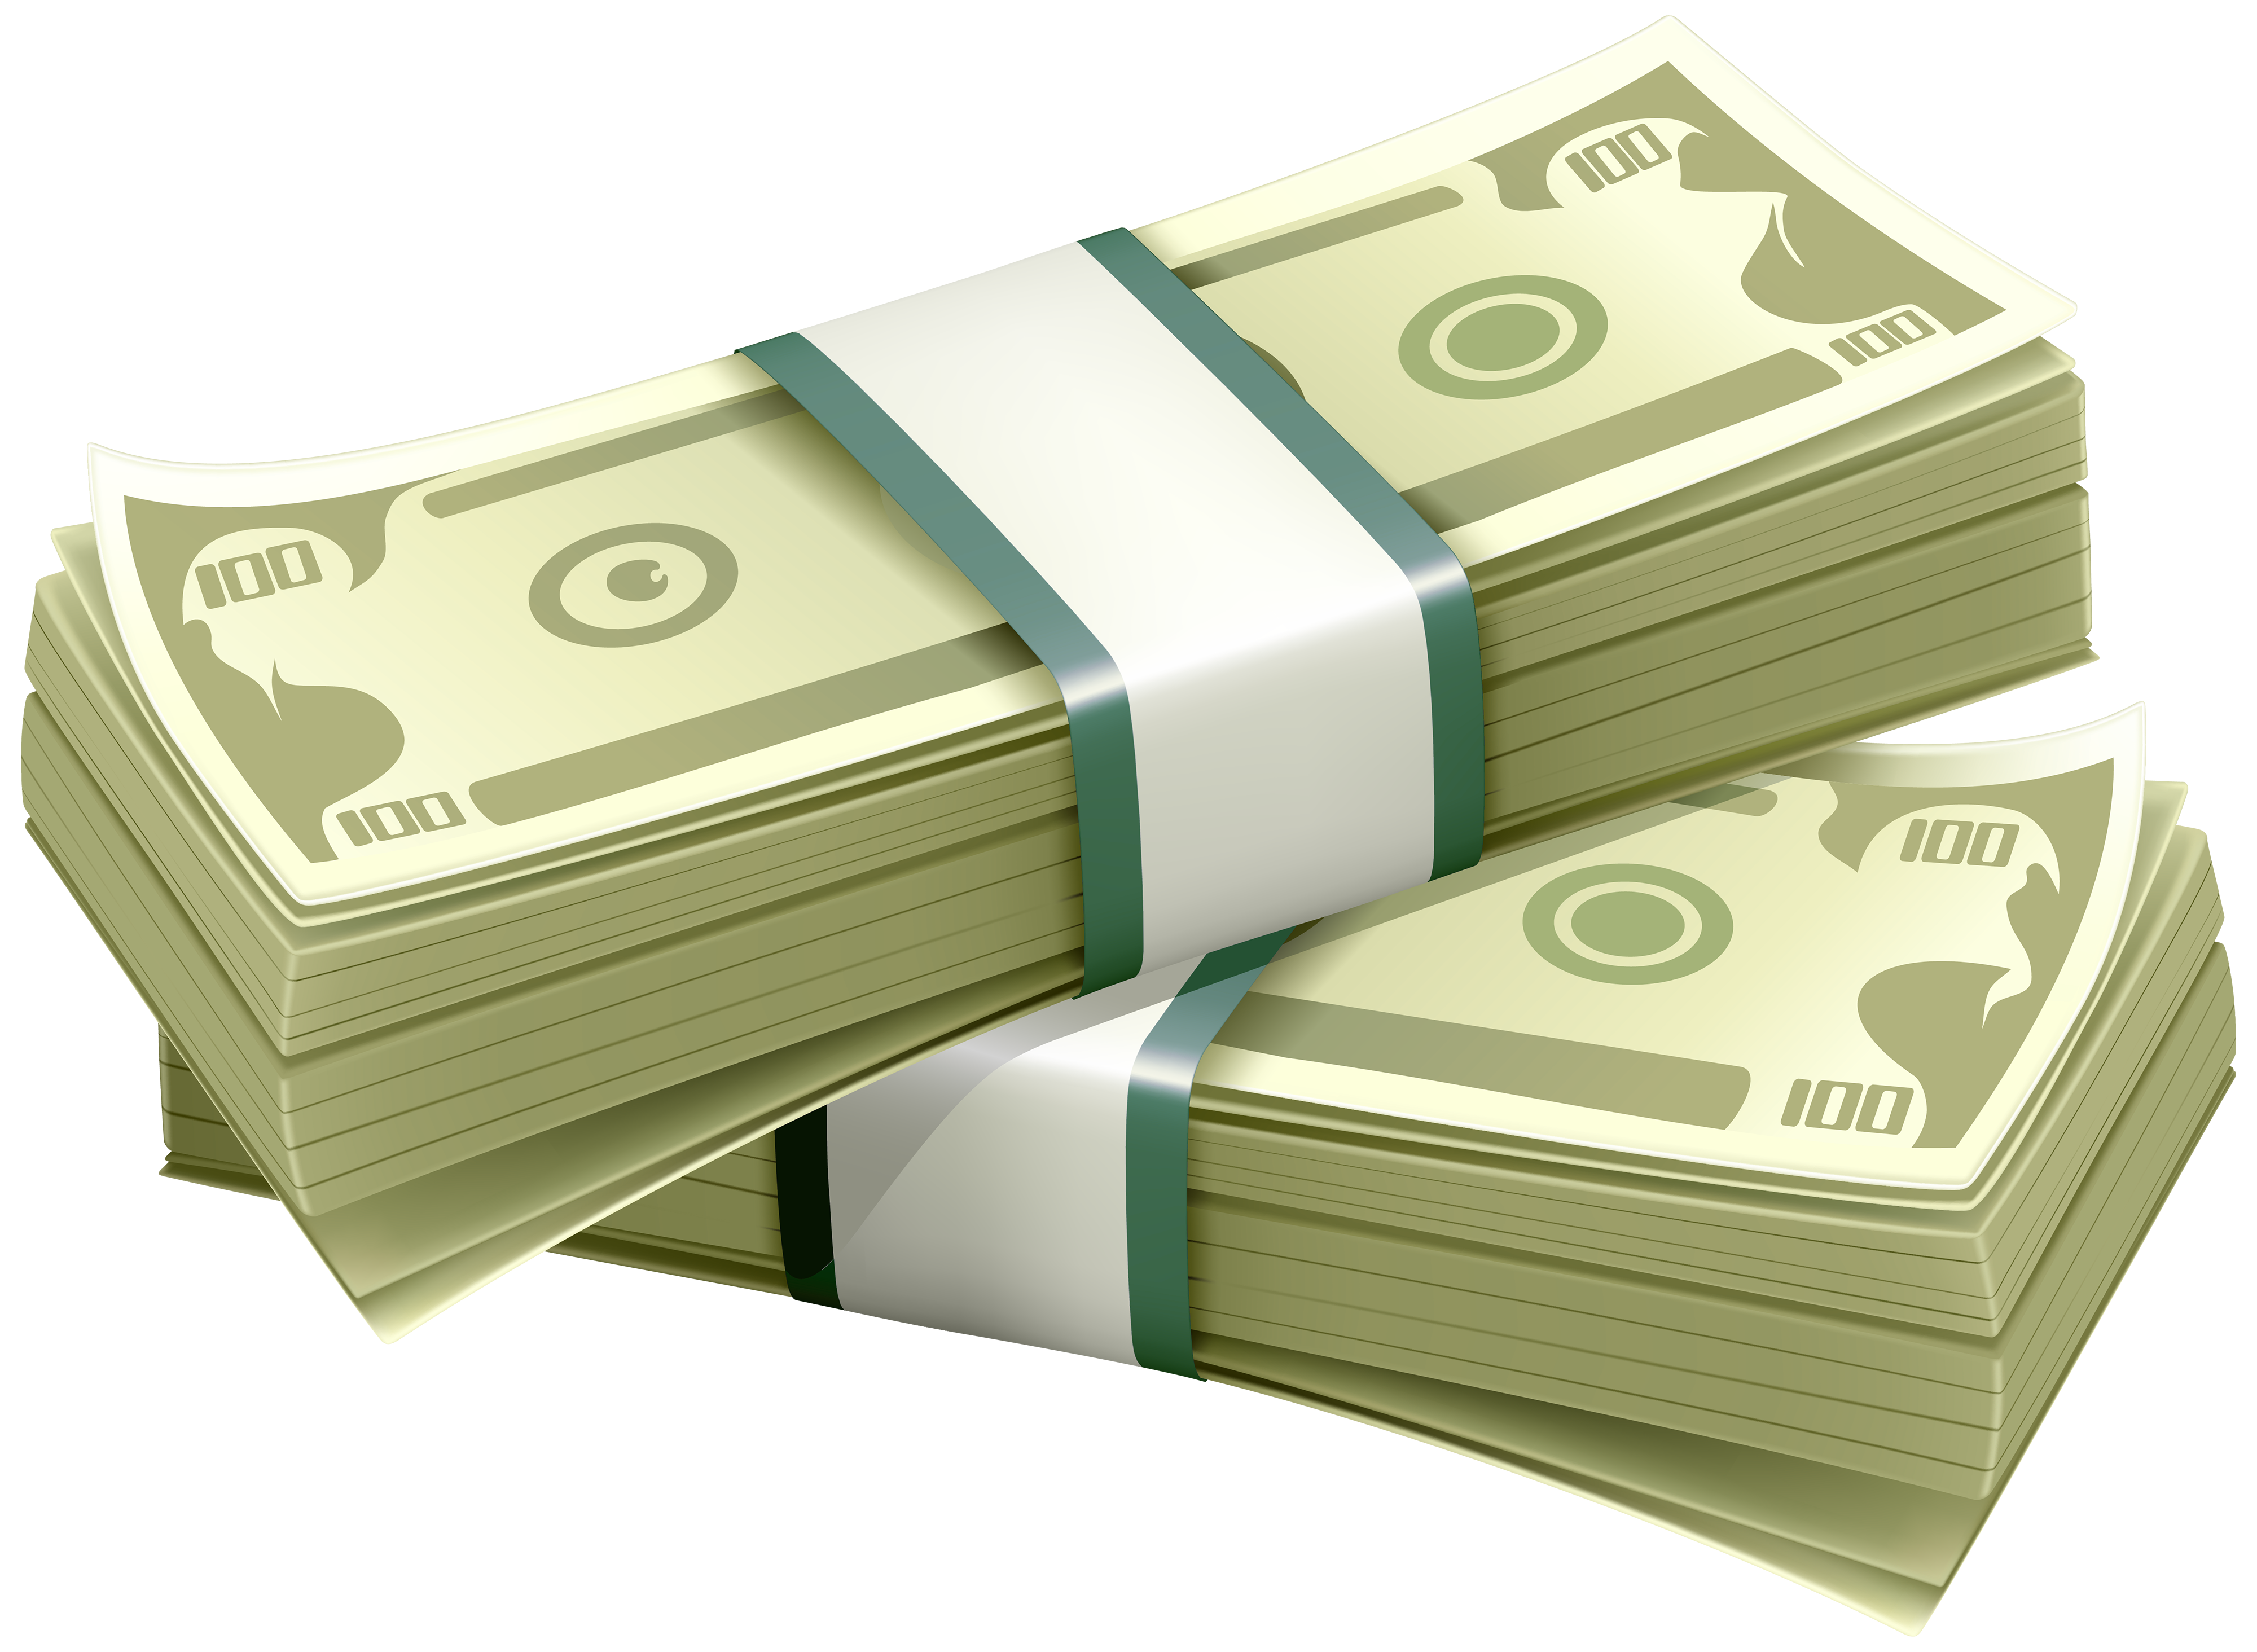 stack of money clipart png